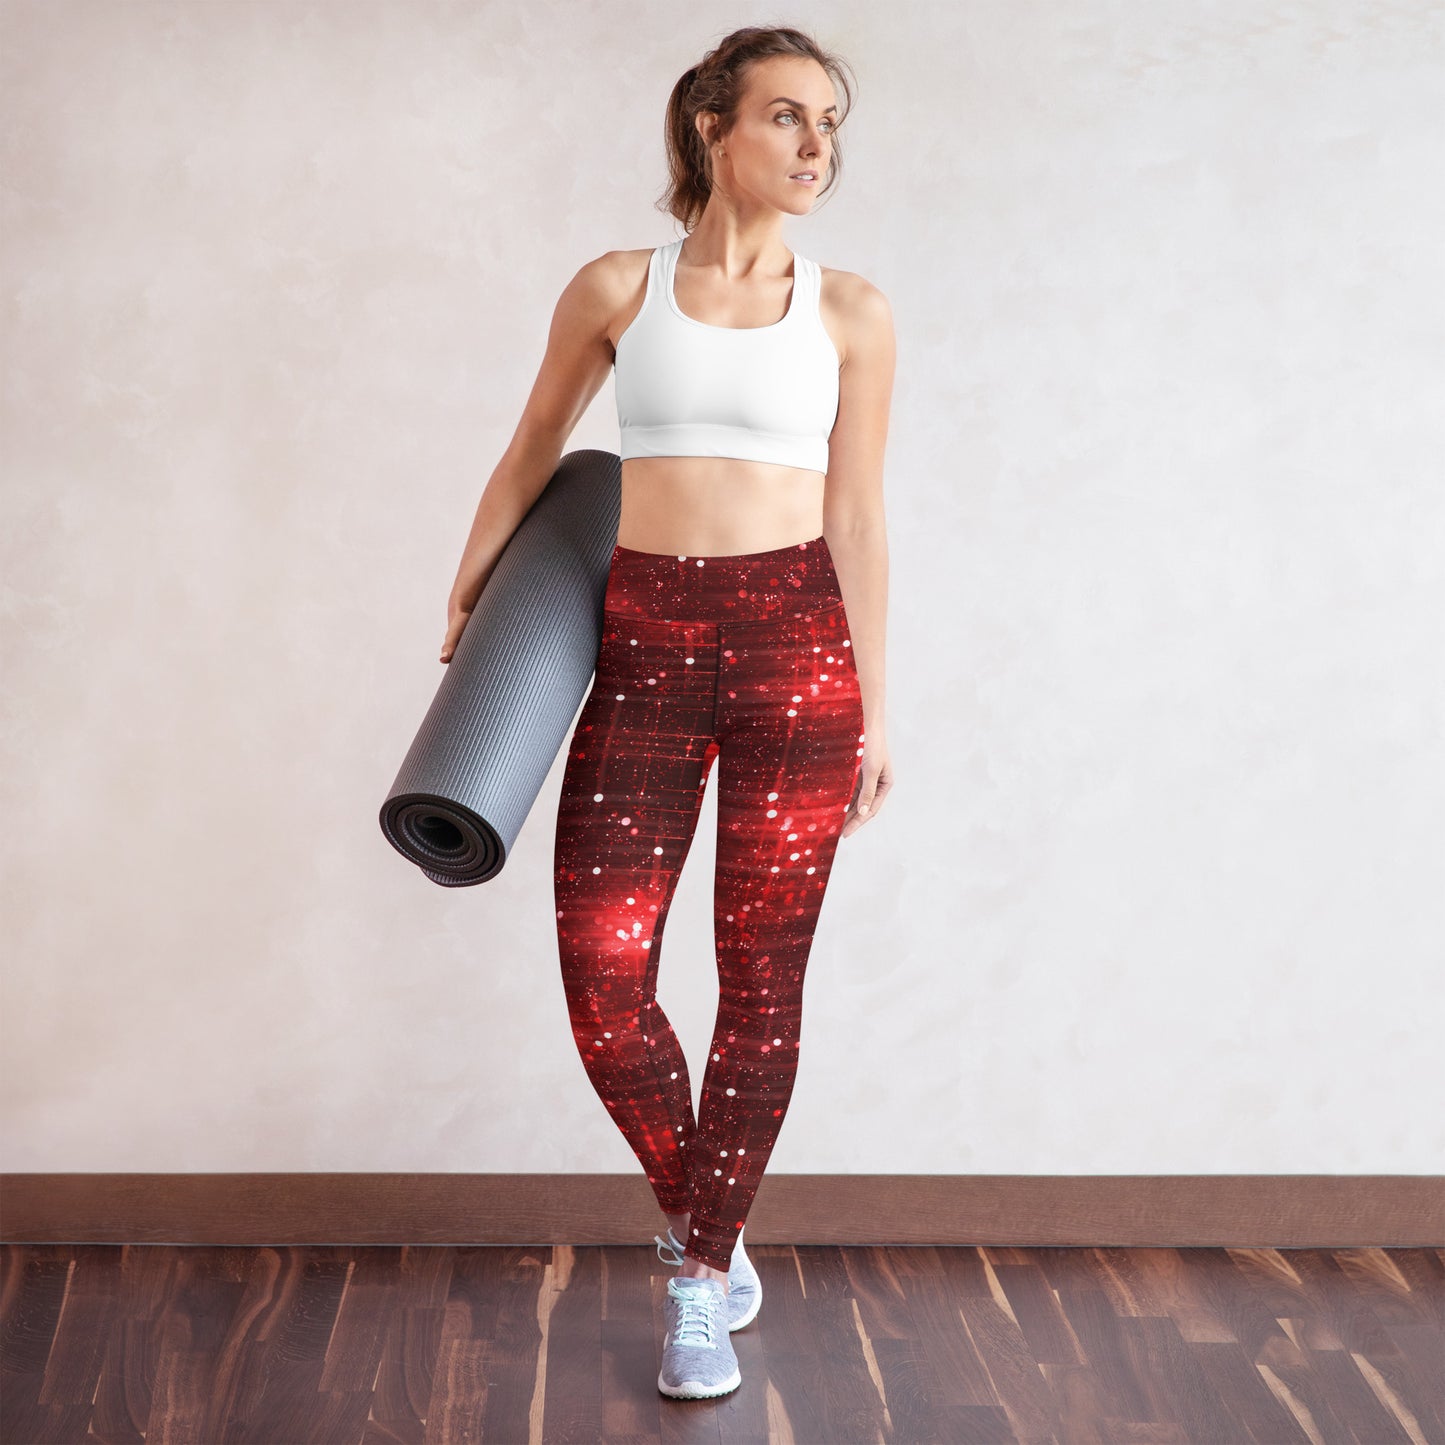 SparkleGlitz Red Glitter Leggings: A Dazzling Fusion of Style and Comfort